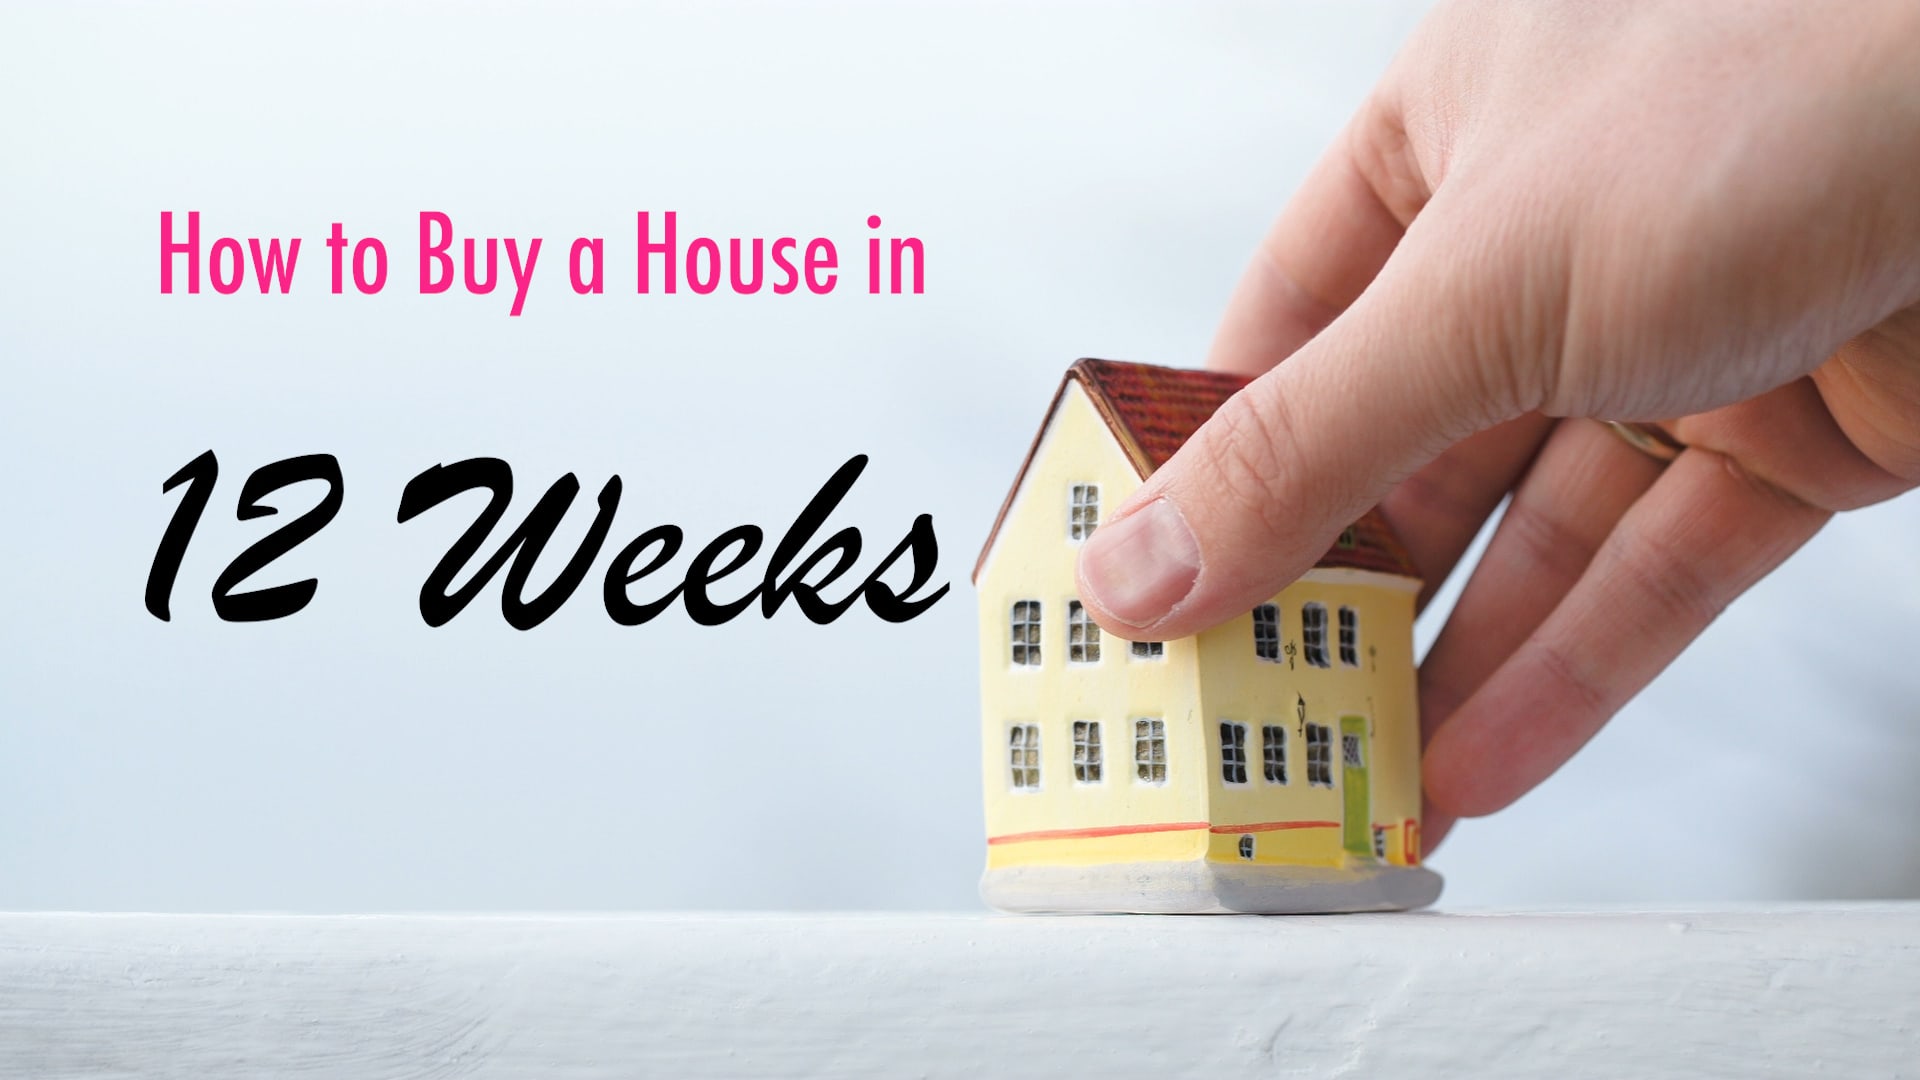 How to Buy a House in 12 Weeks – Download the FREE Home Buying Workbook!